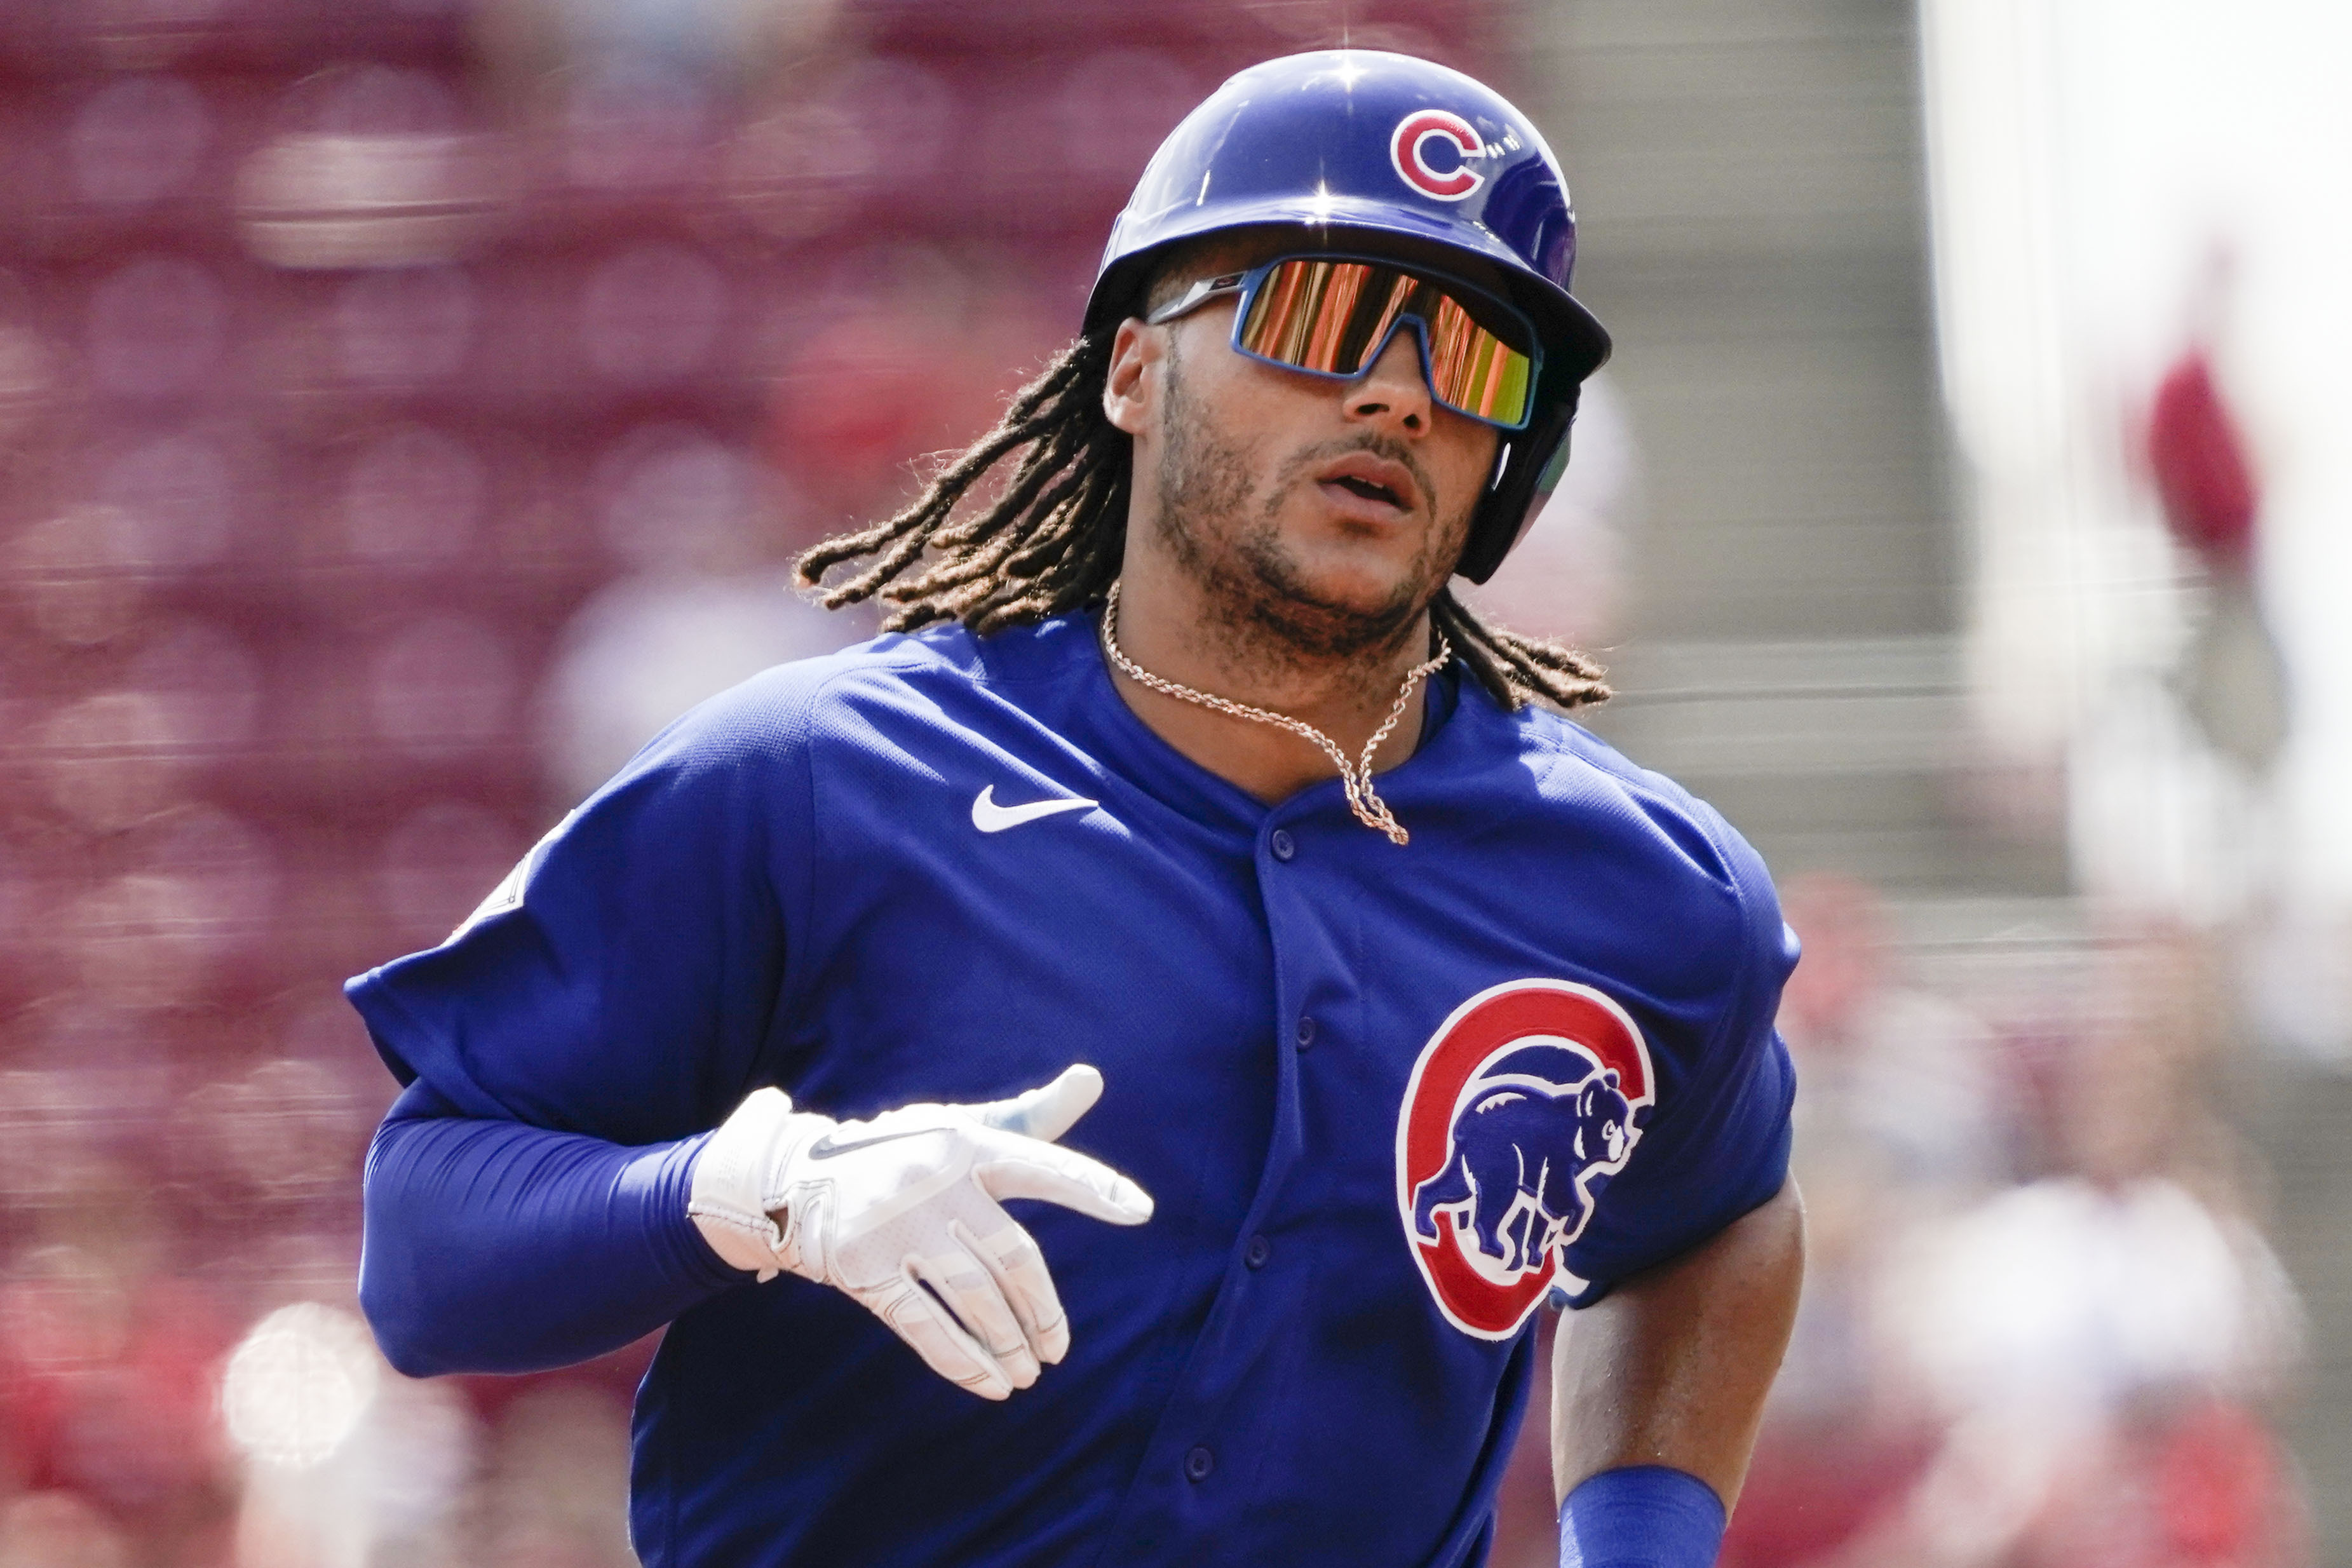 Michael Hermosillo relieved for first Cubs hit of 2022